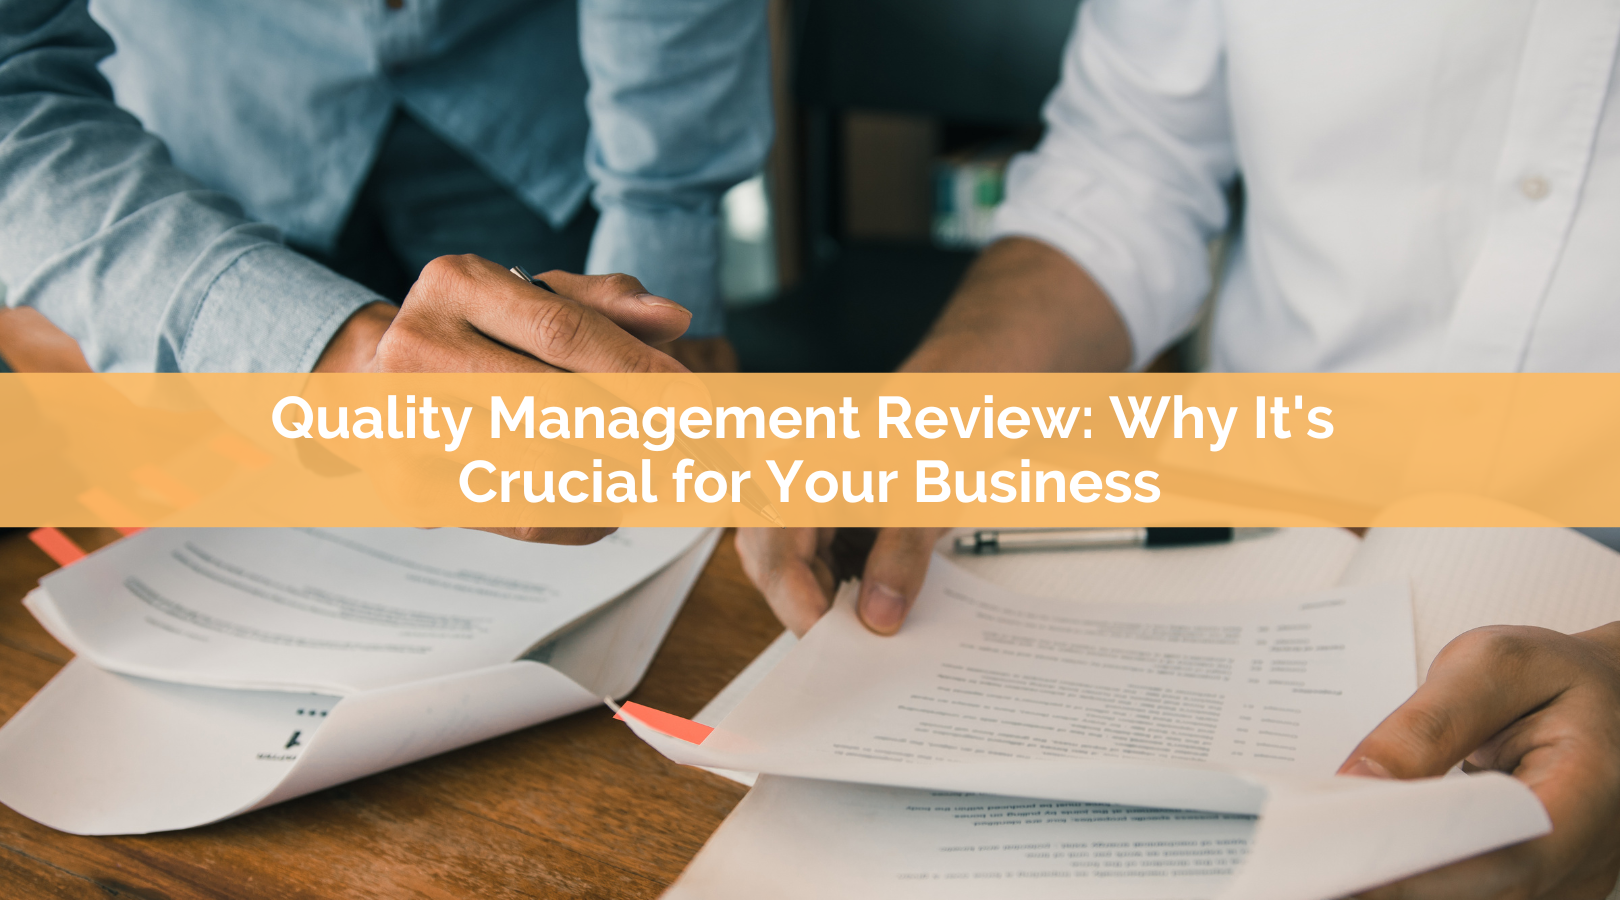 Quality Management Review: Why It's Crucial for Your Business